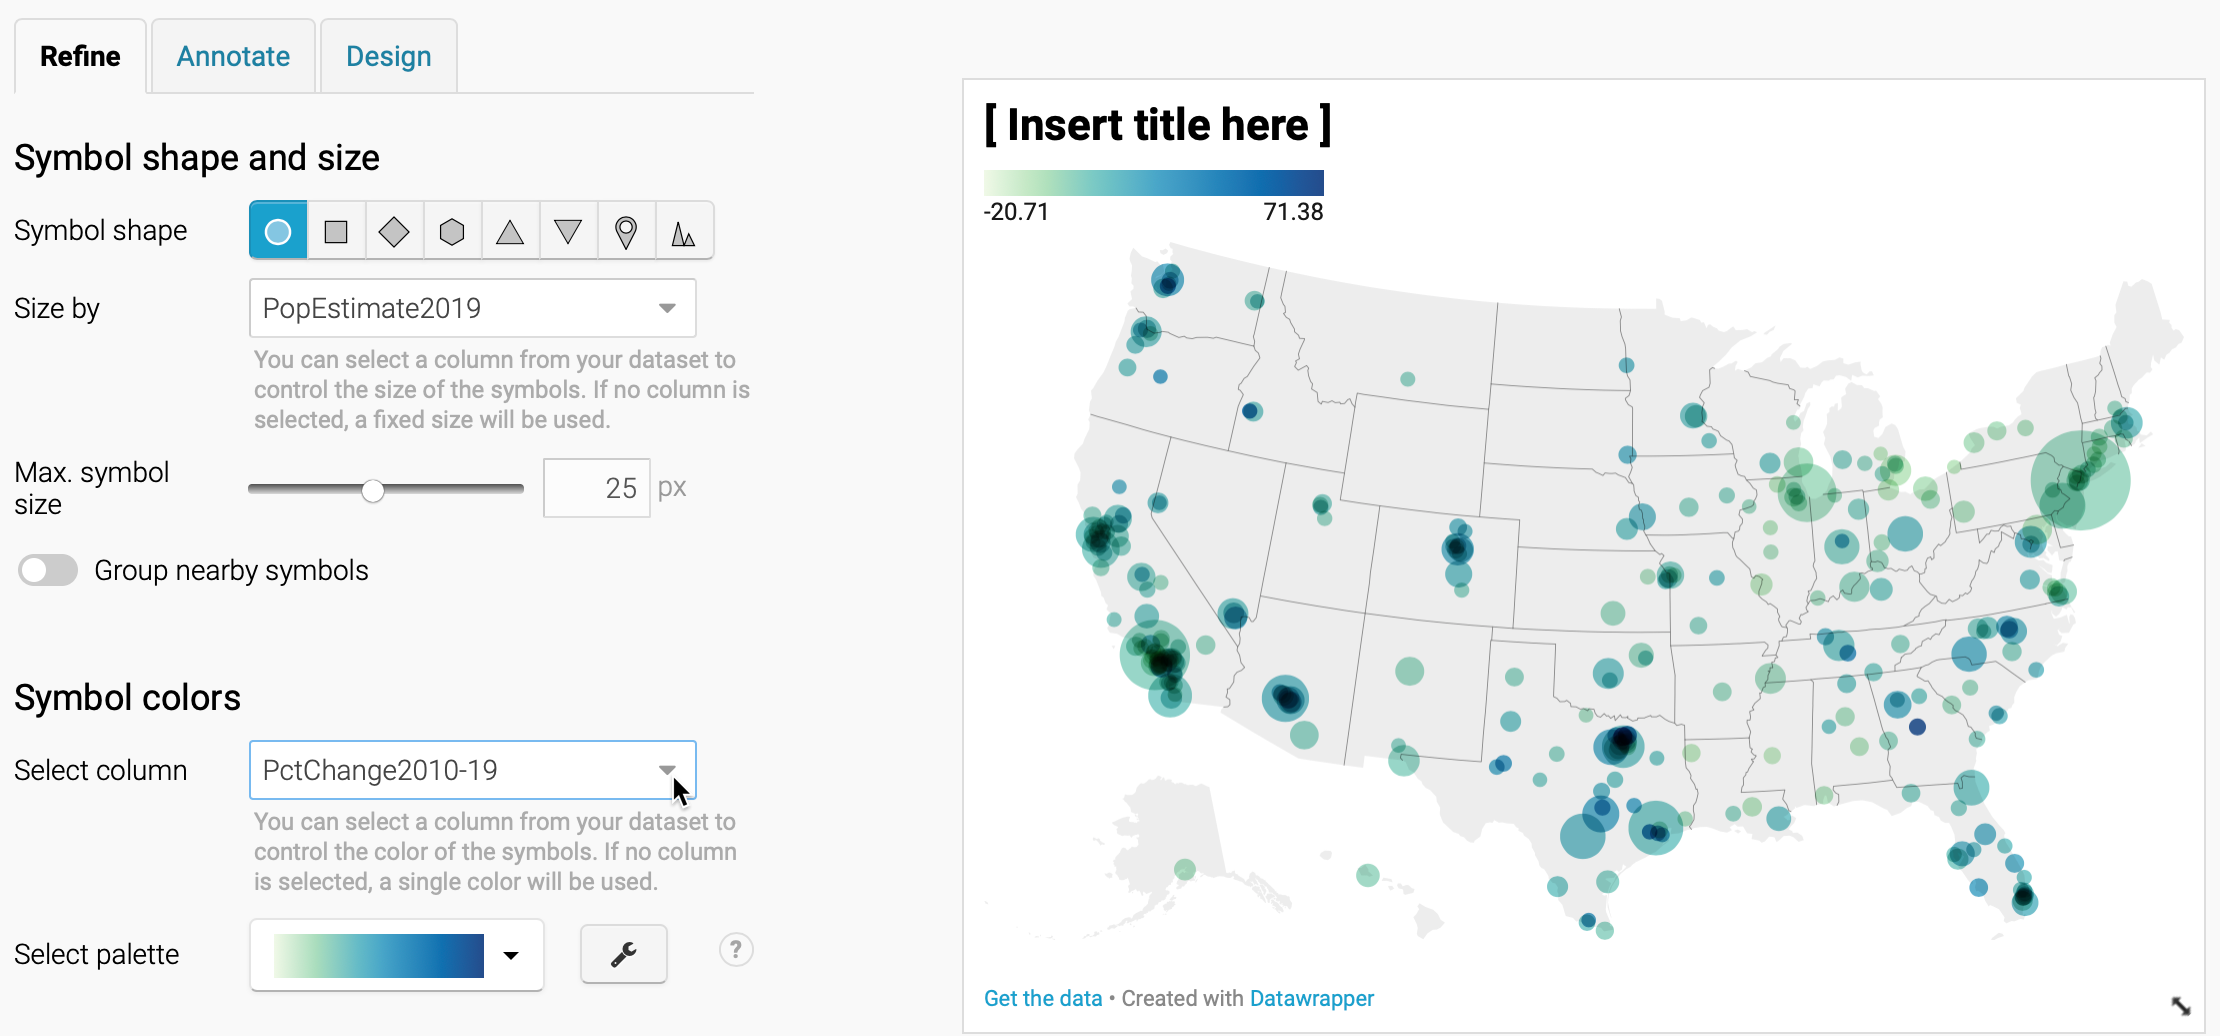 Refine your map by selecting data to display symbol shapes, sizes, and colors.